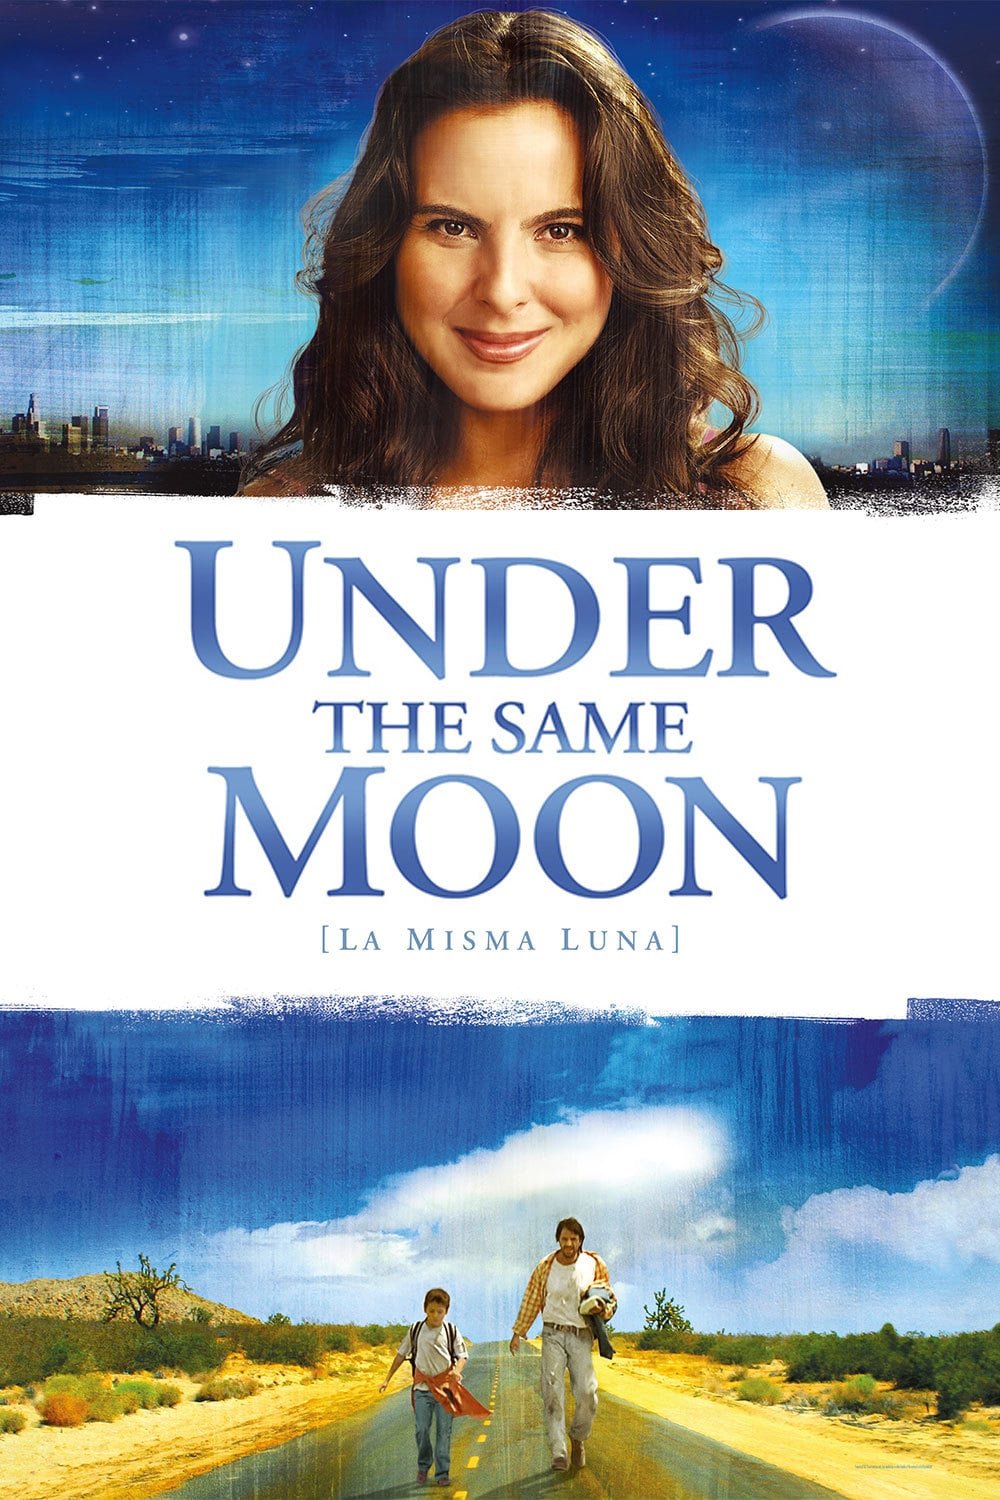 Under the Same Moon dvd cover vertical.jpeg